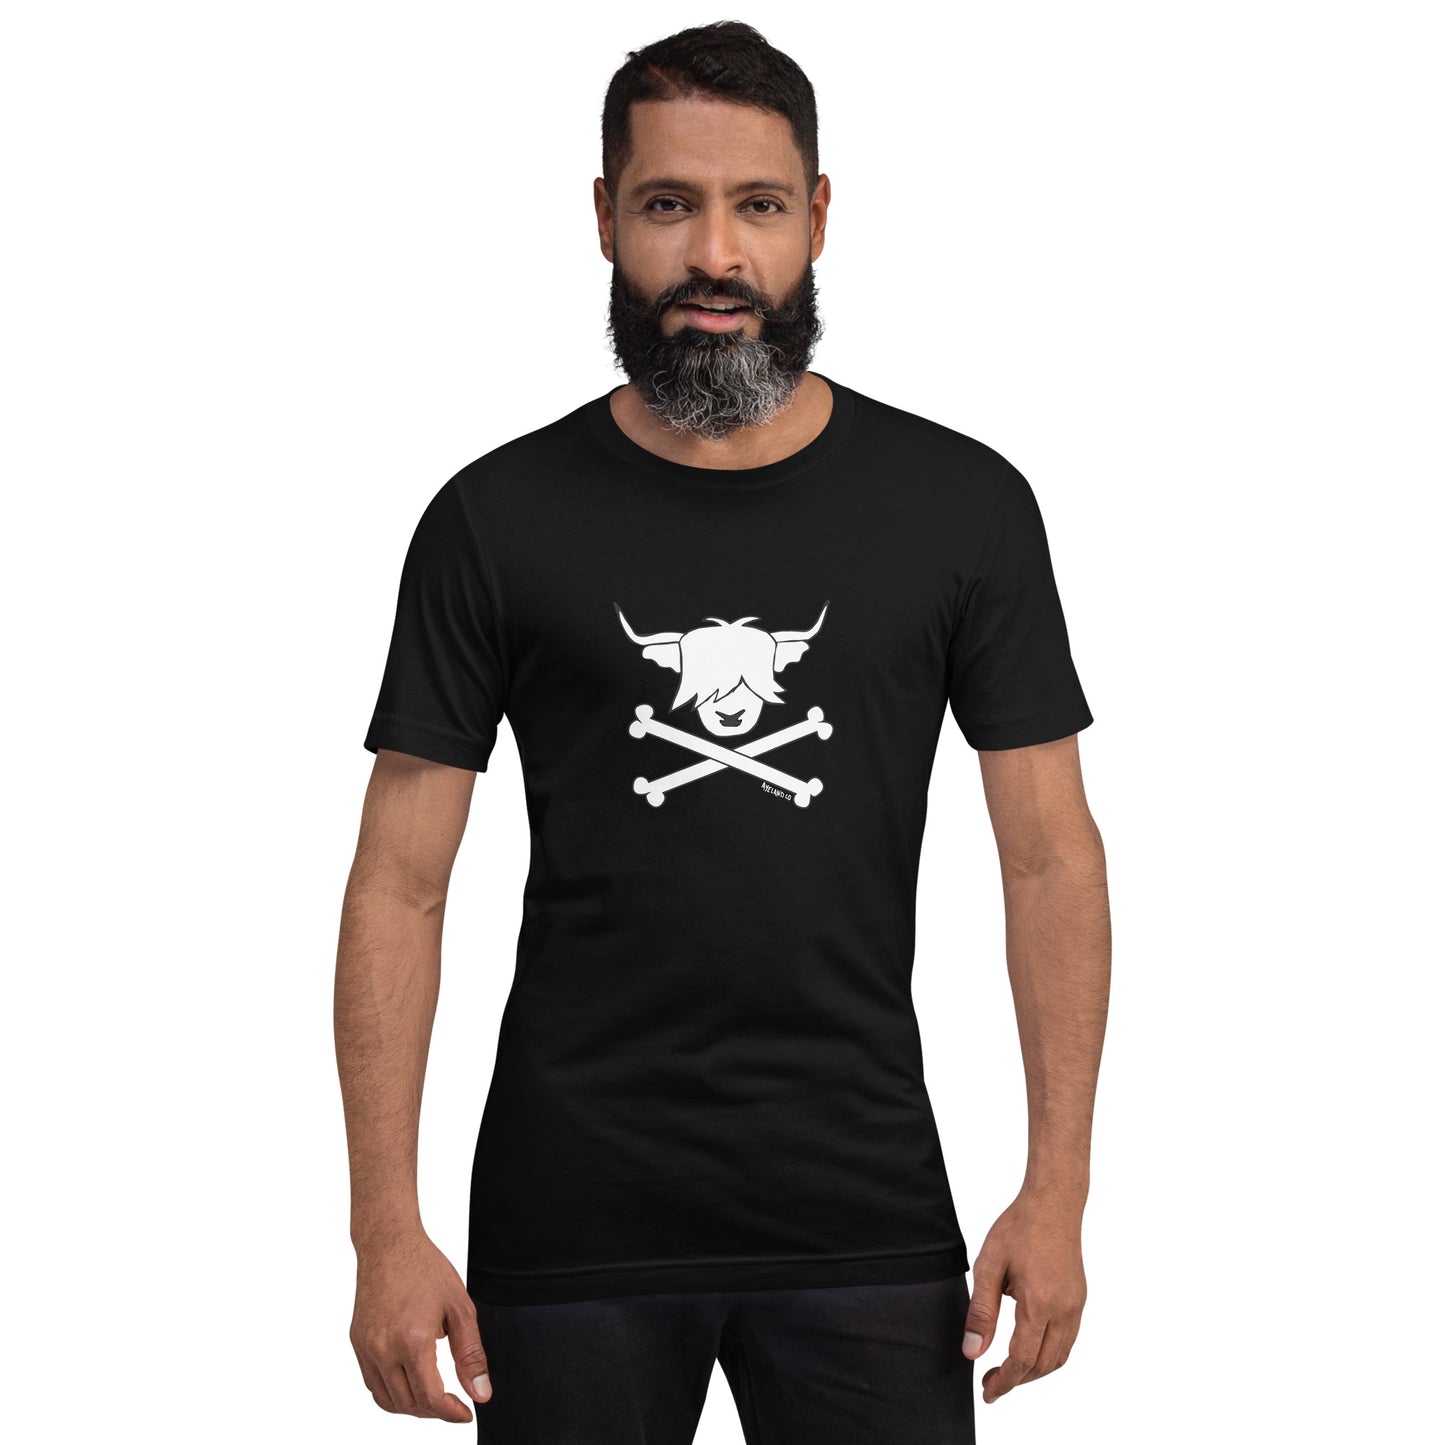 Man wearing a black t-shirt with the design of a pirate highland cow